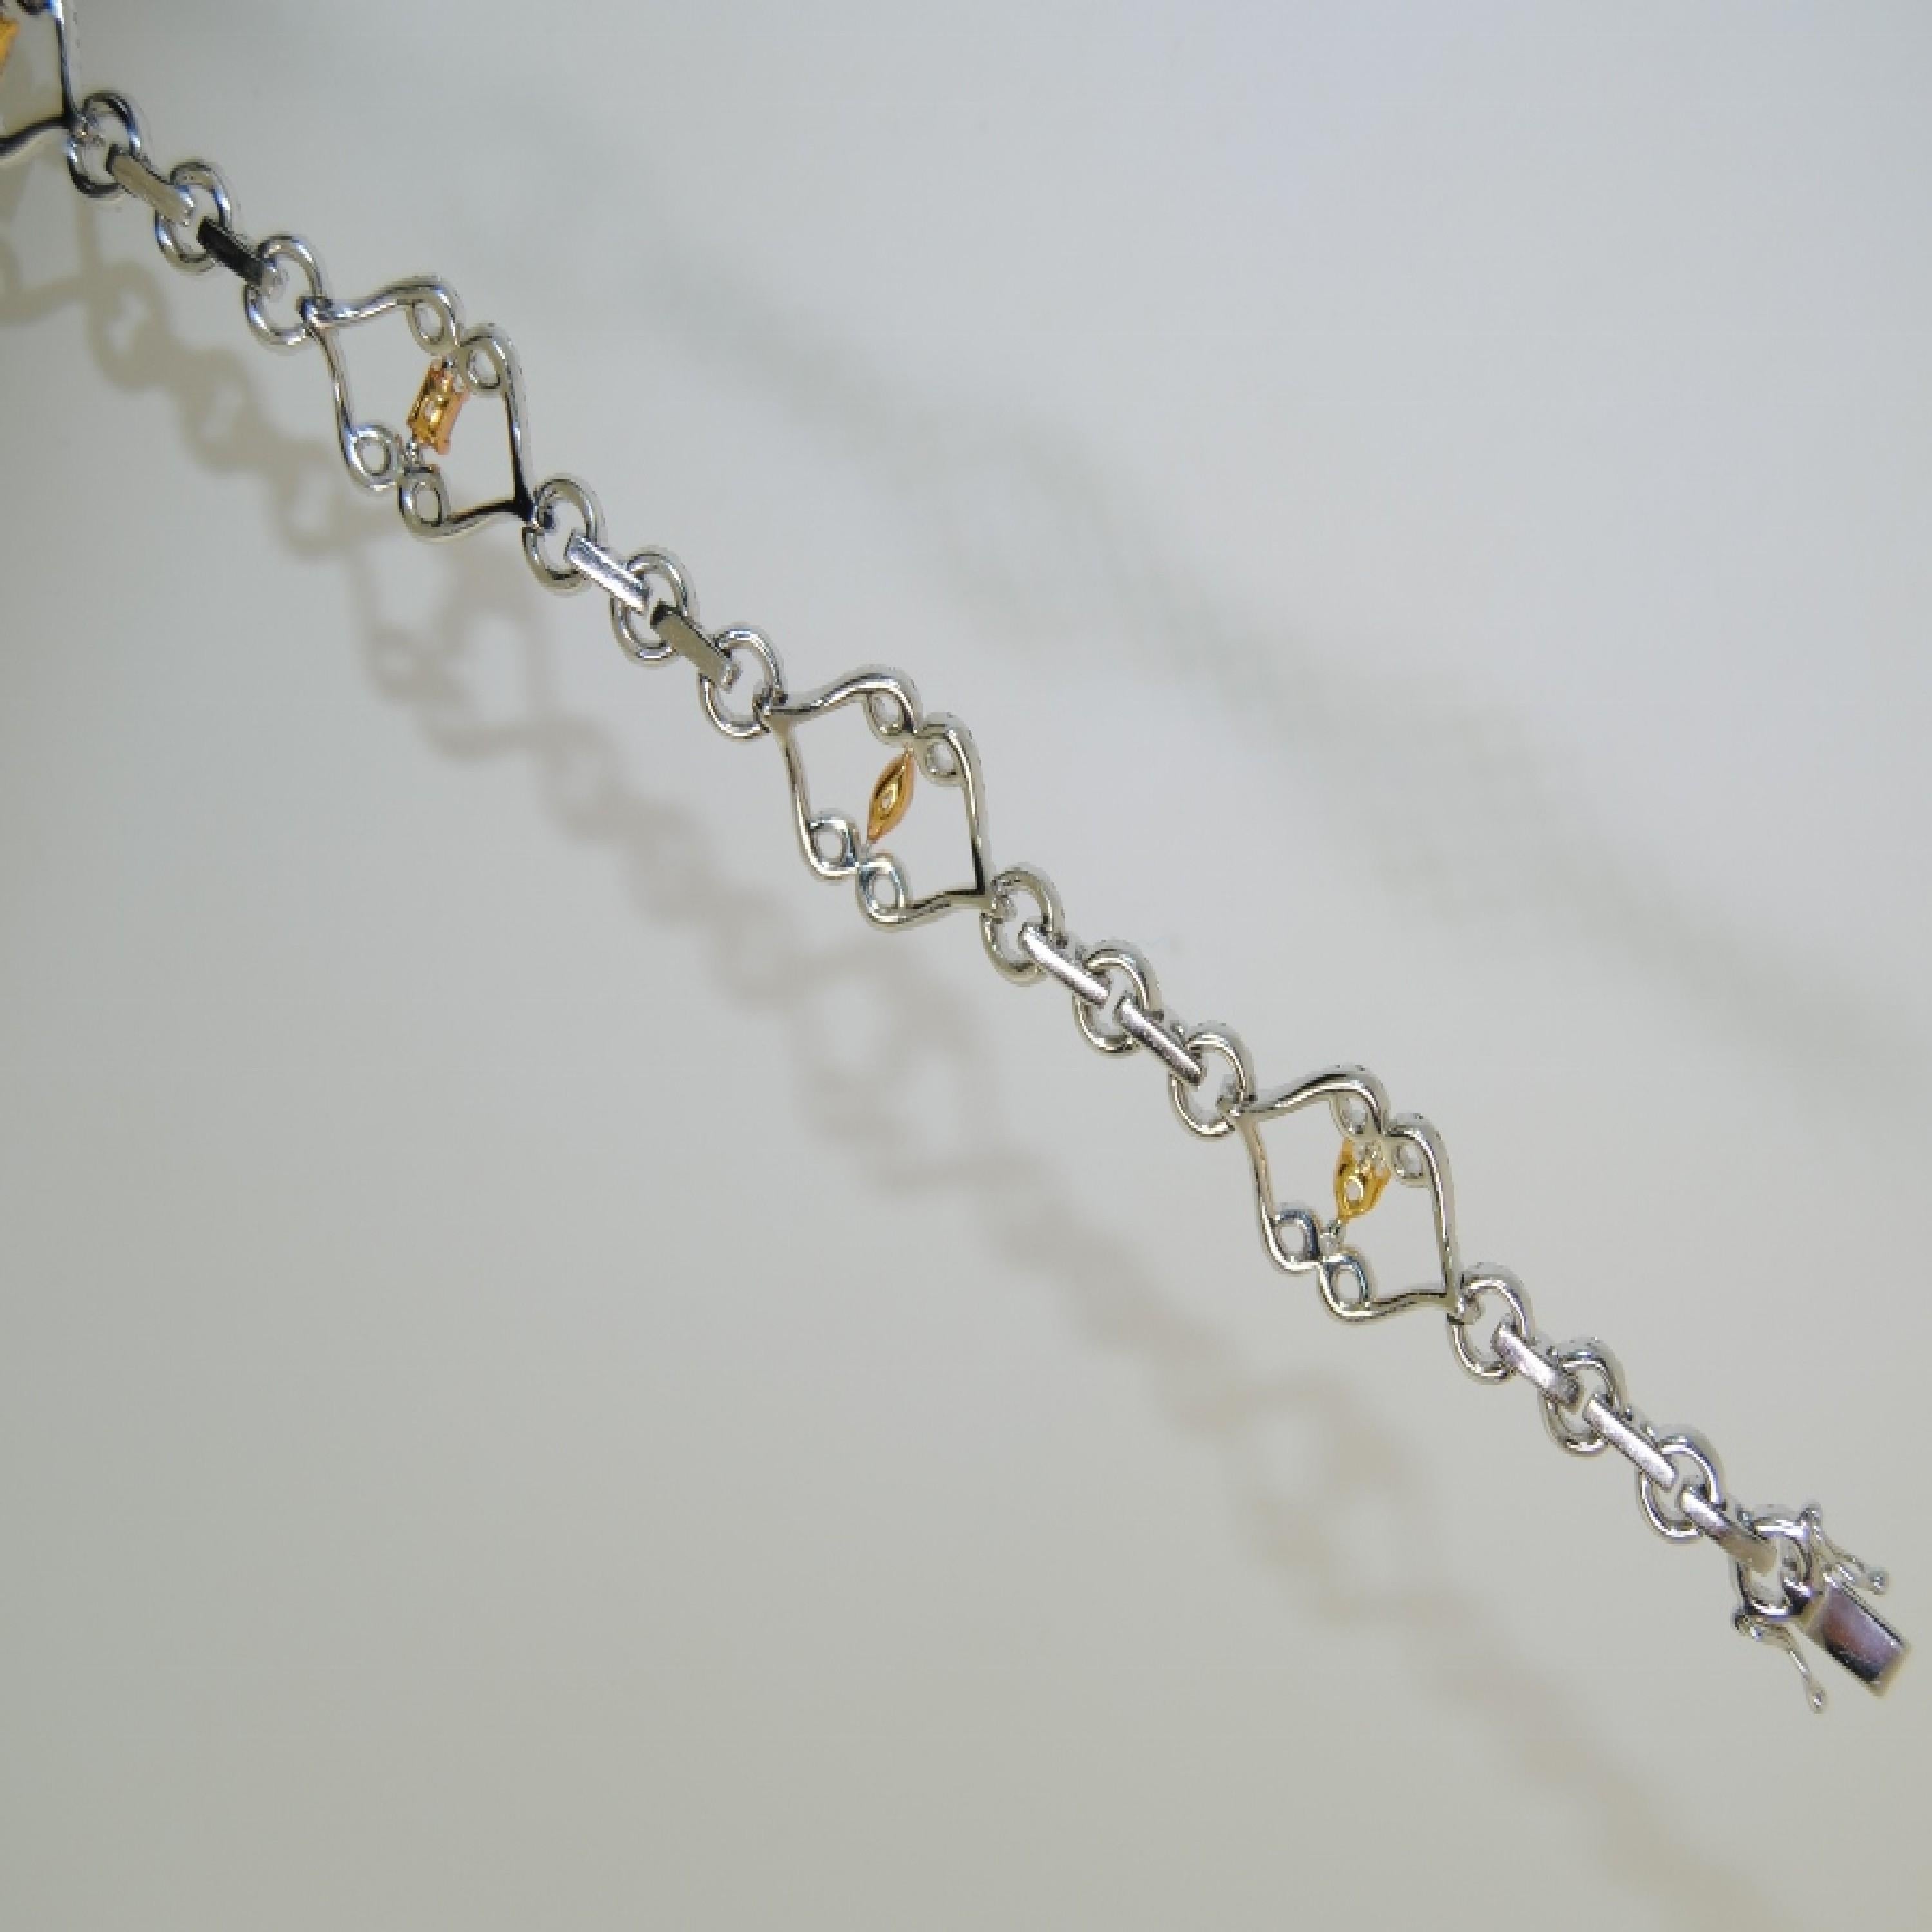 14 Karat White Gold Bracelet with White and Fancy Diamond/Yellow In New Condition For Sale In Los Angeles, CA